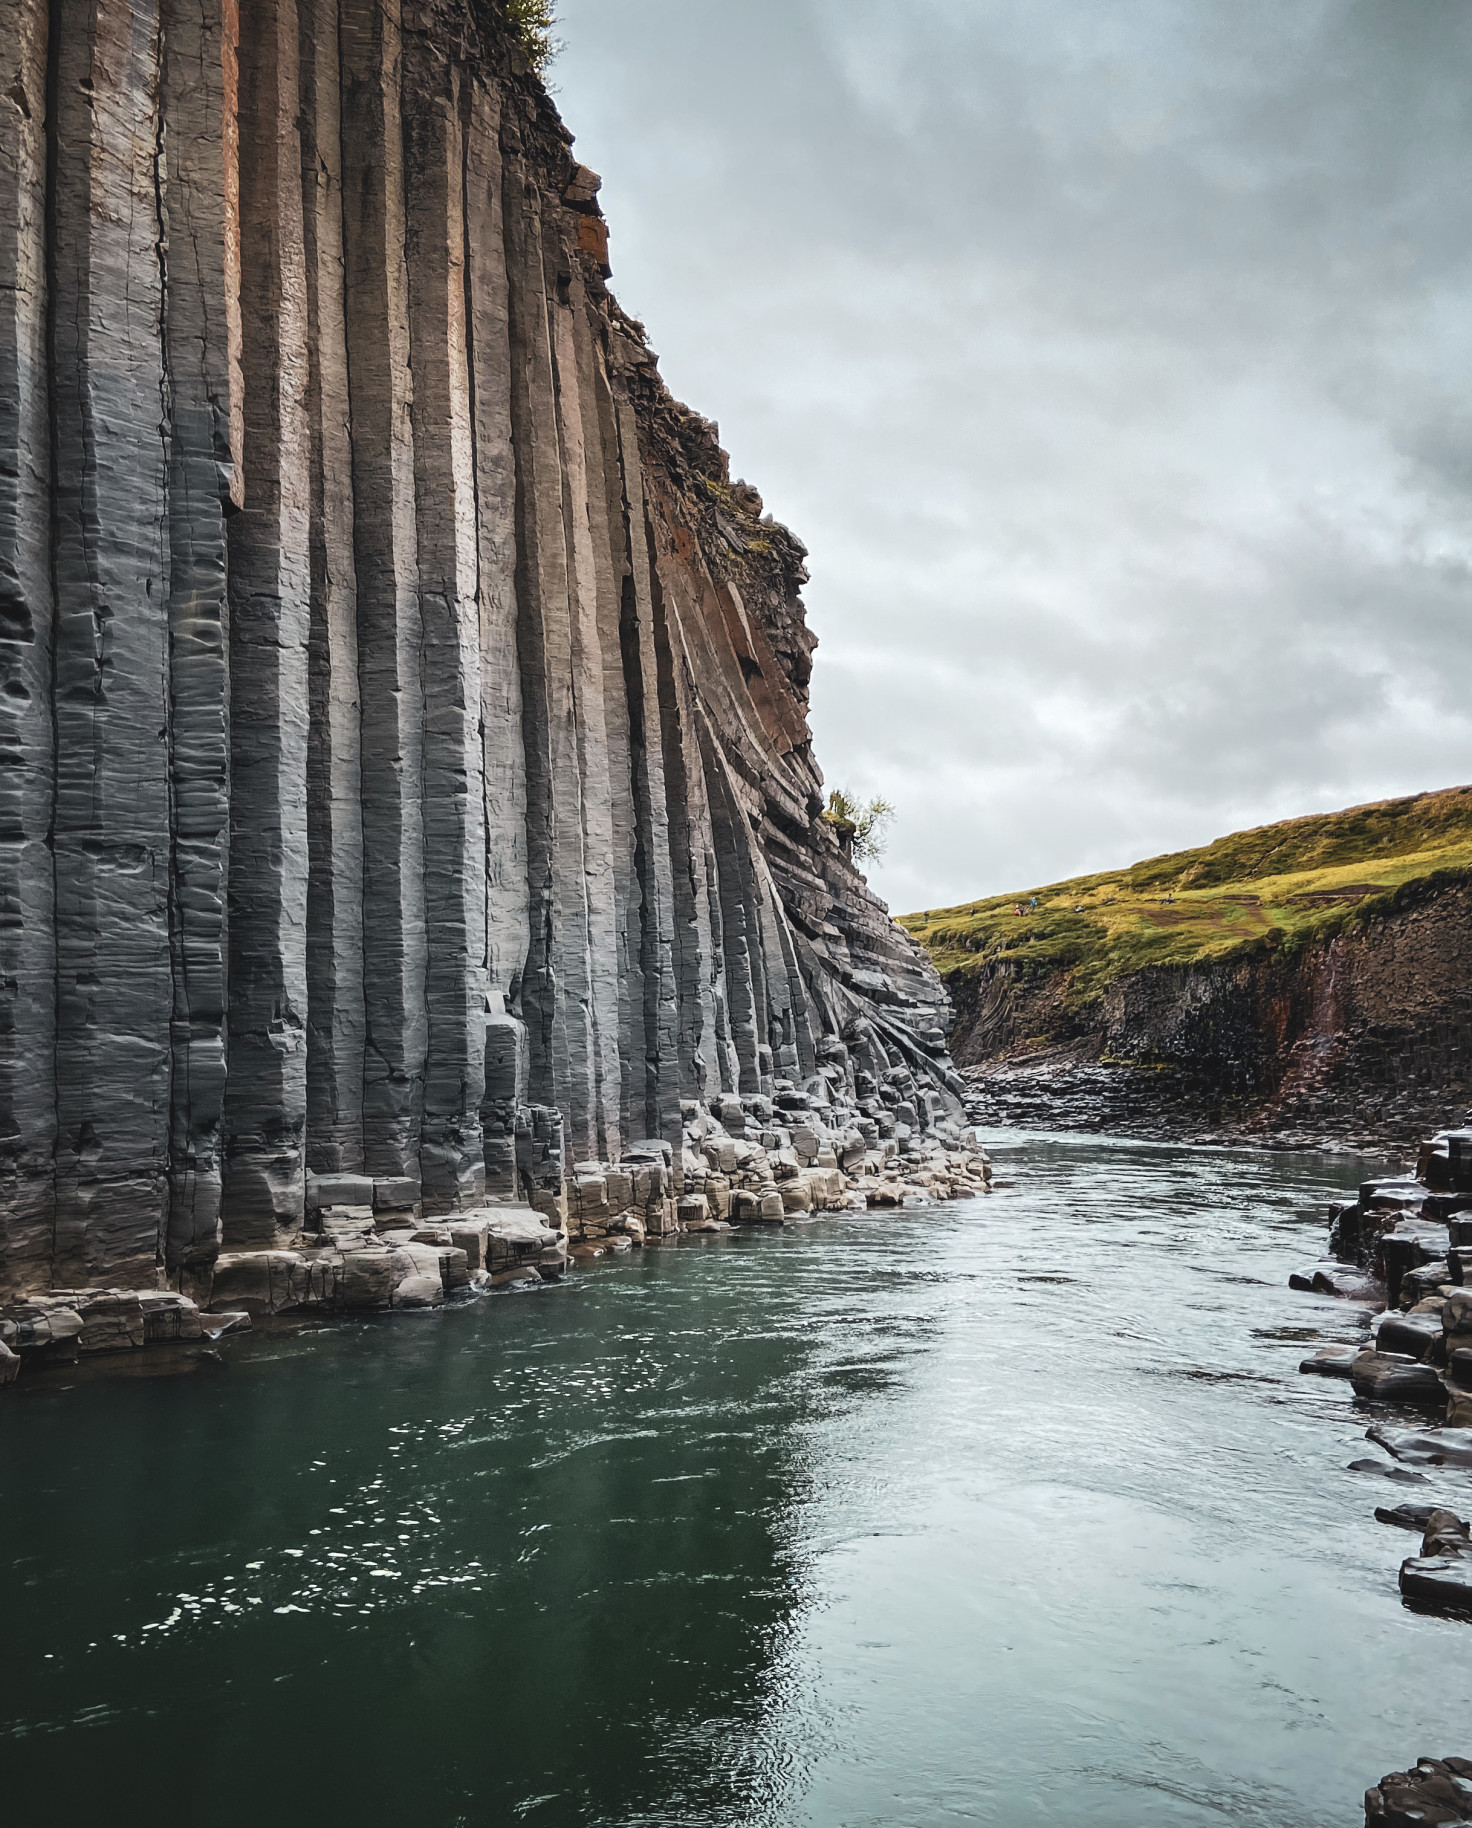 A grey stone cliff in Iceland with a green emerald river flowing through.